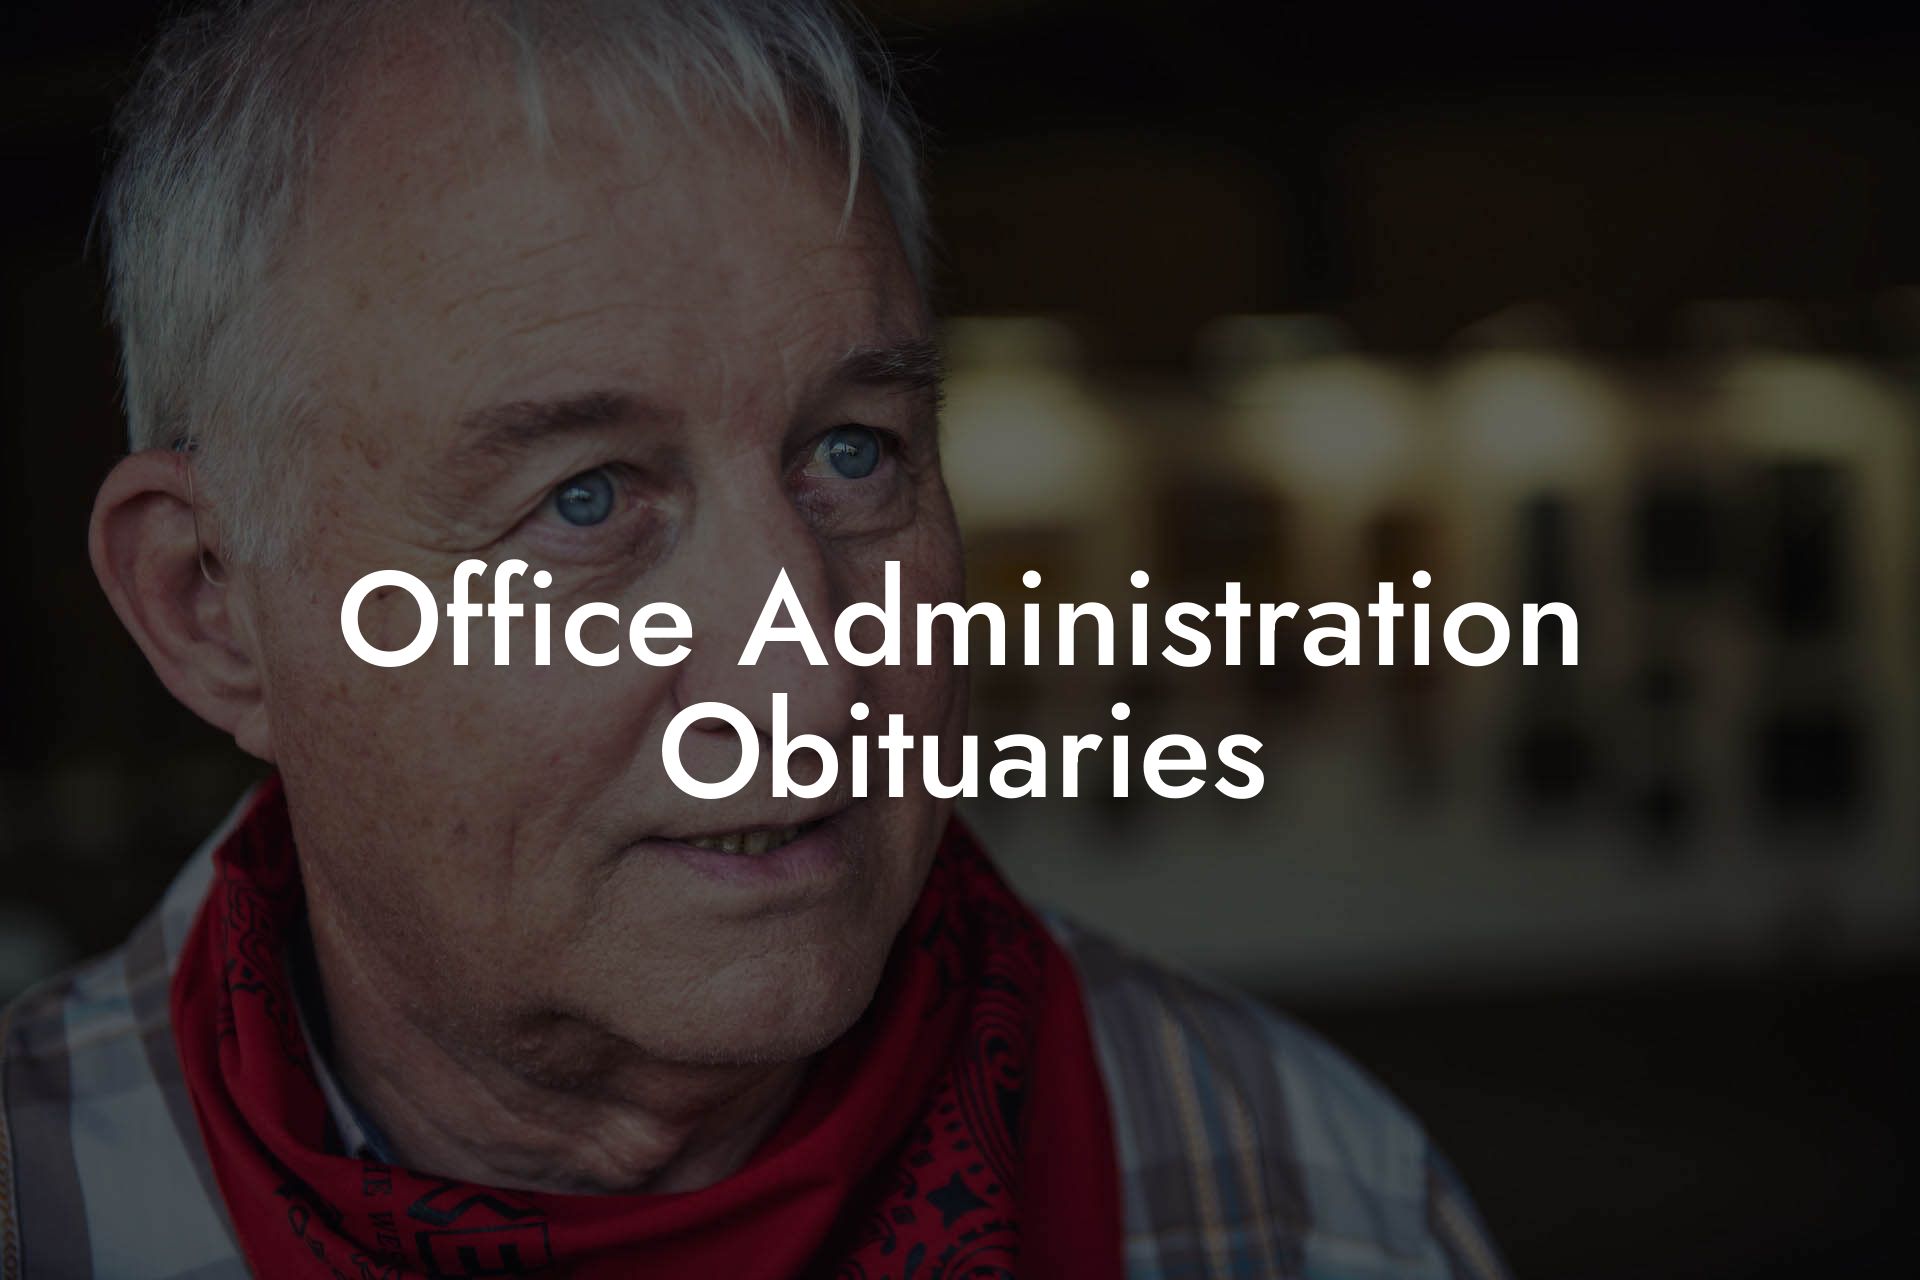 OFFICE ADMINISTRATION Obituaries